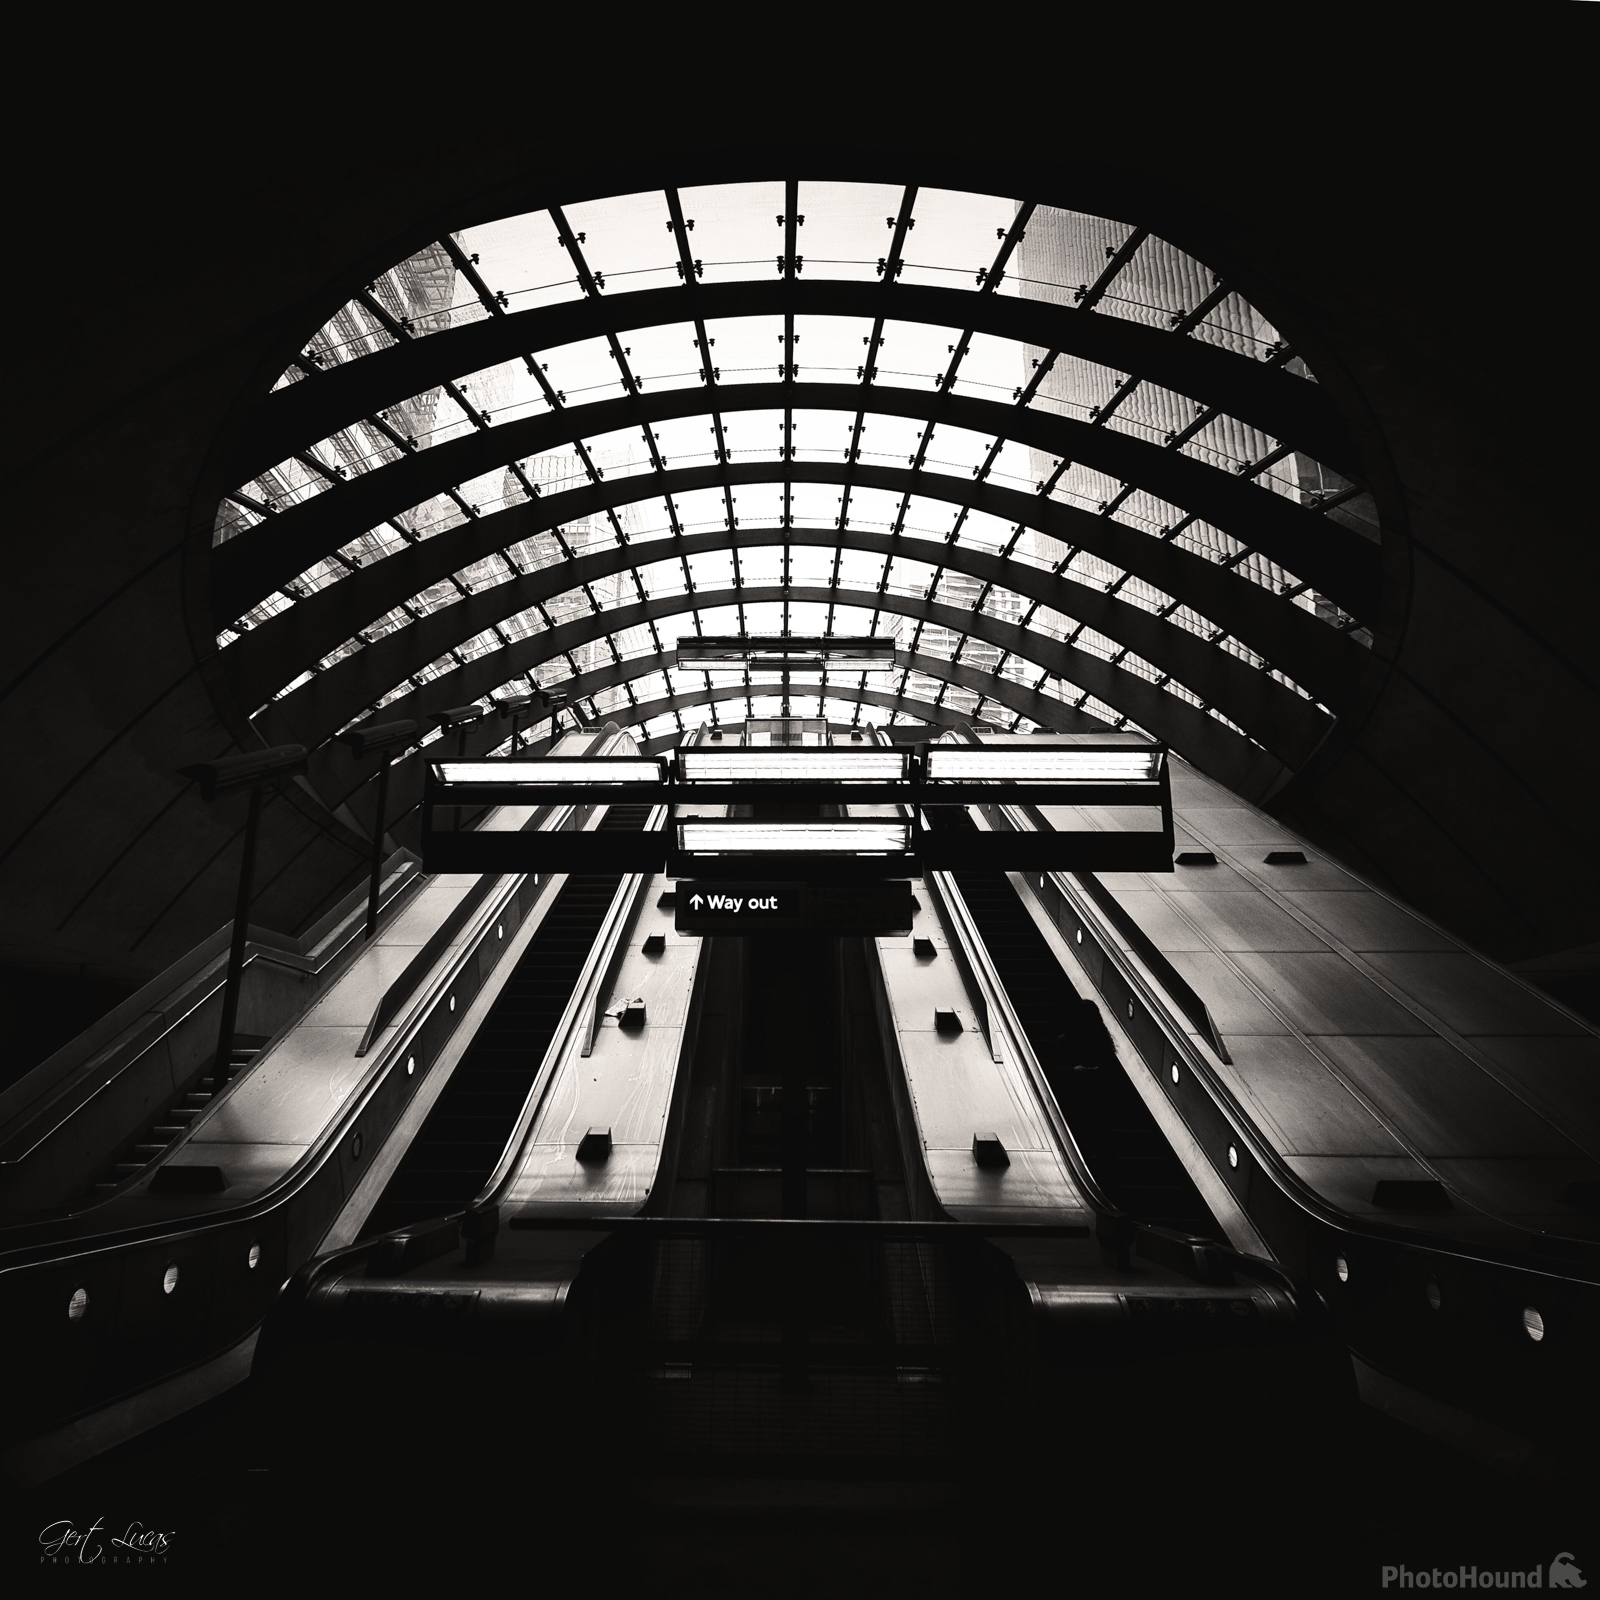 Image of Canary Wharf Underground Station by Gert Lucas